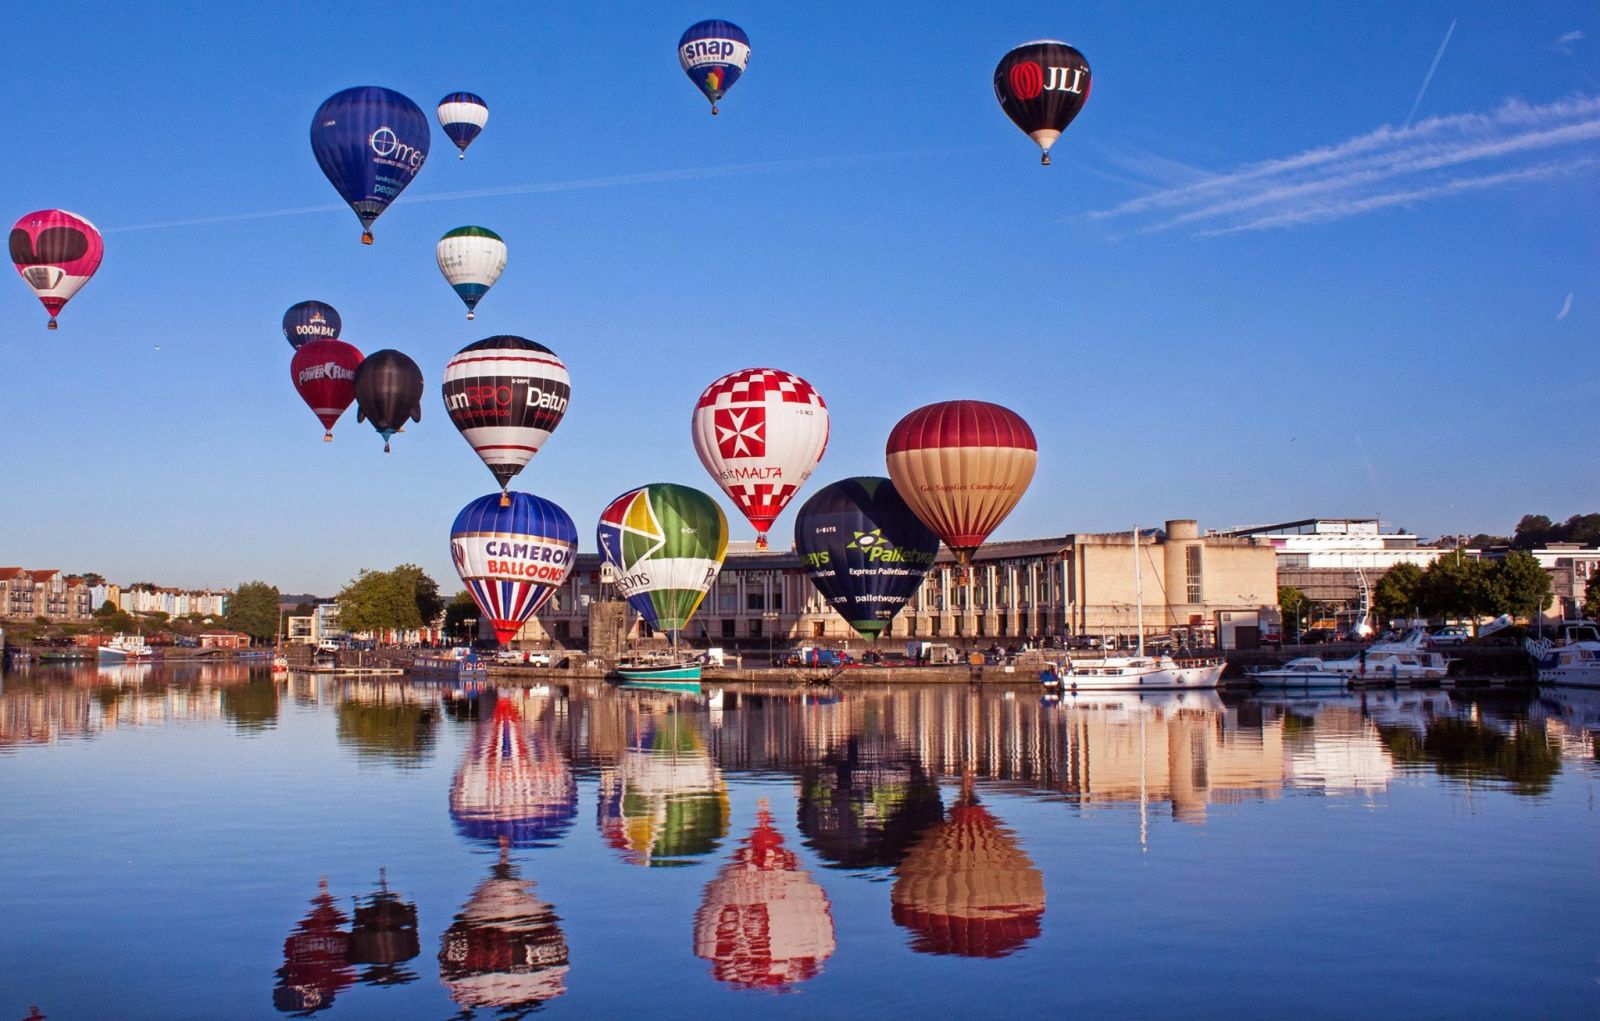 Less than two weeks until the Bristol Balloon Fiesta!